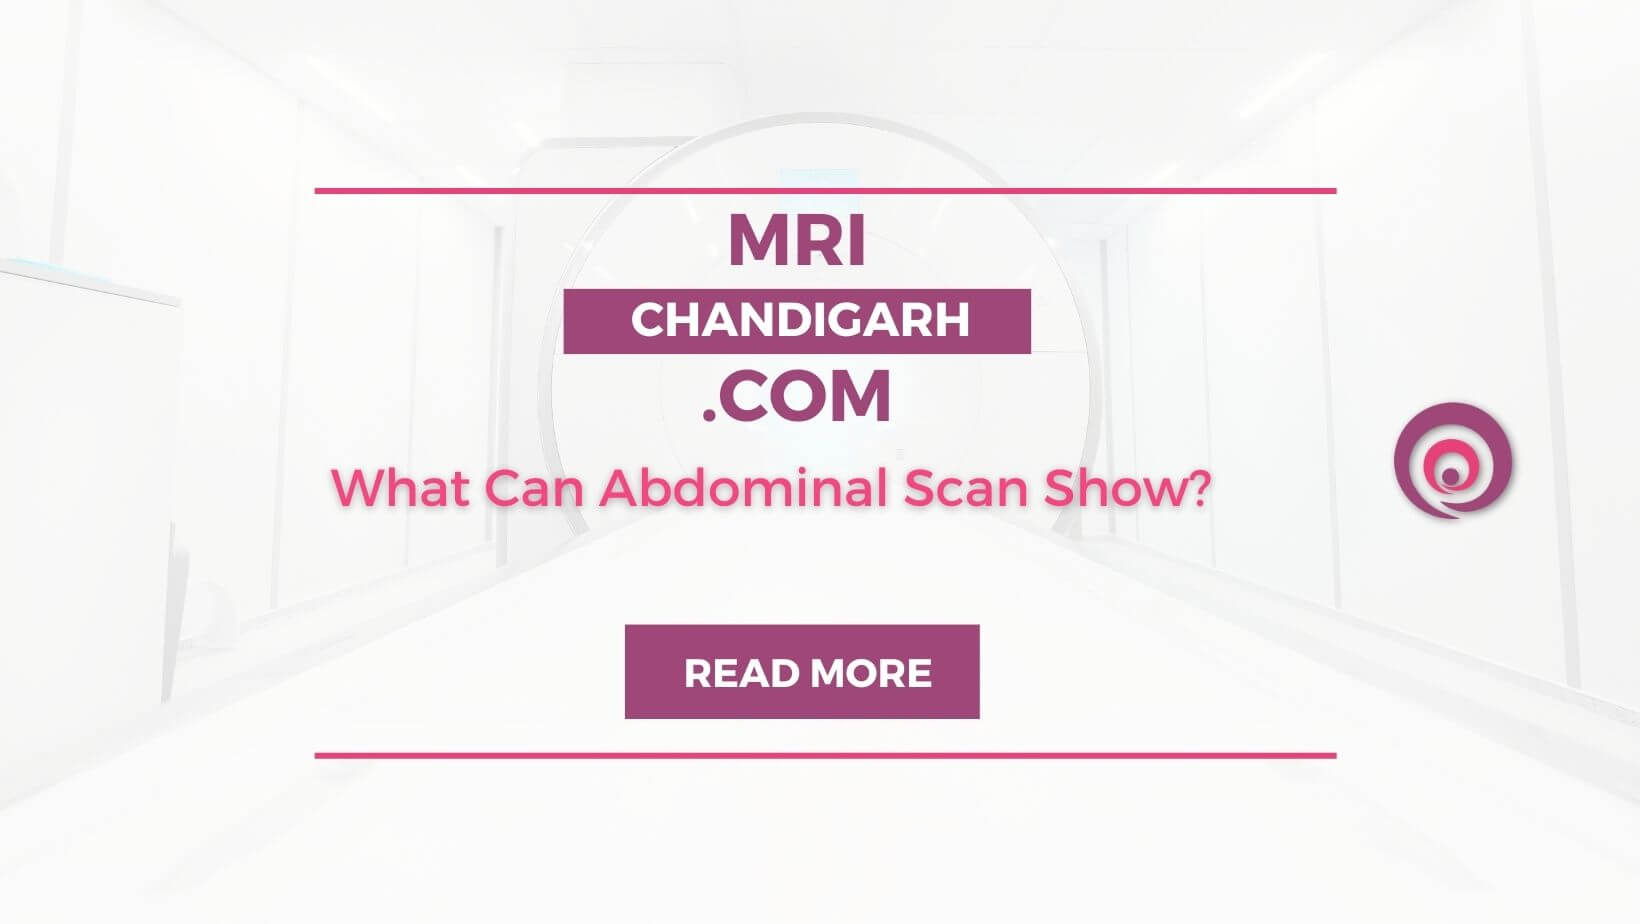 What Can Abdominal Scan Show?